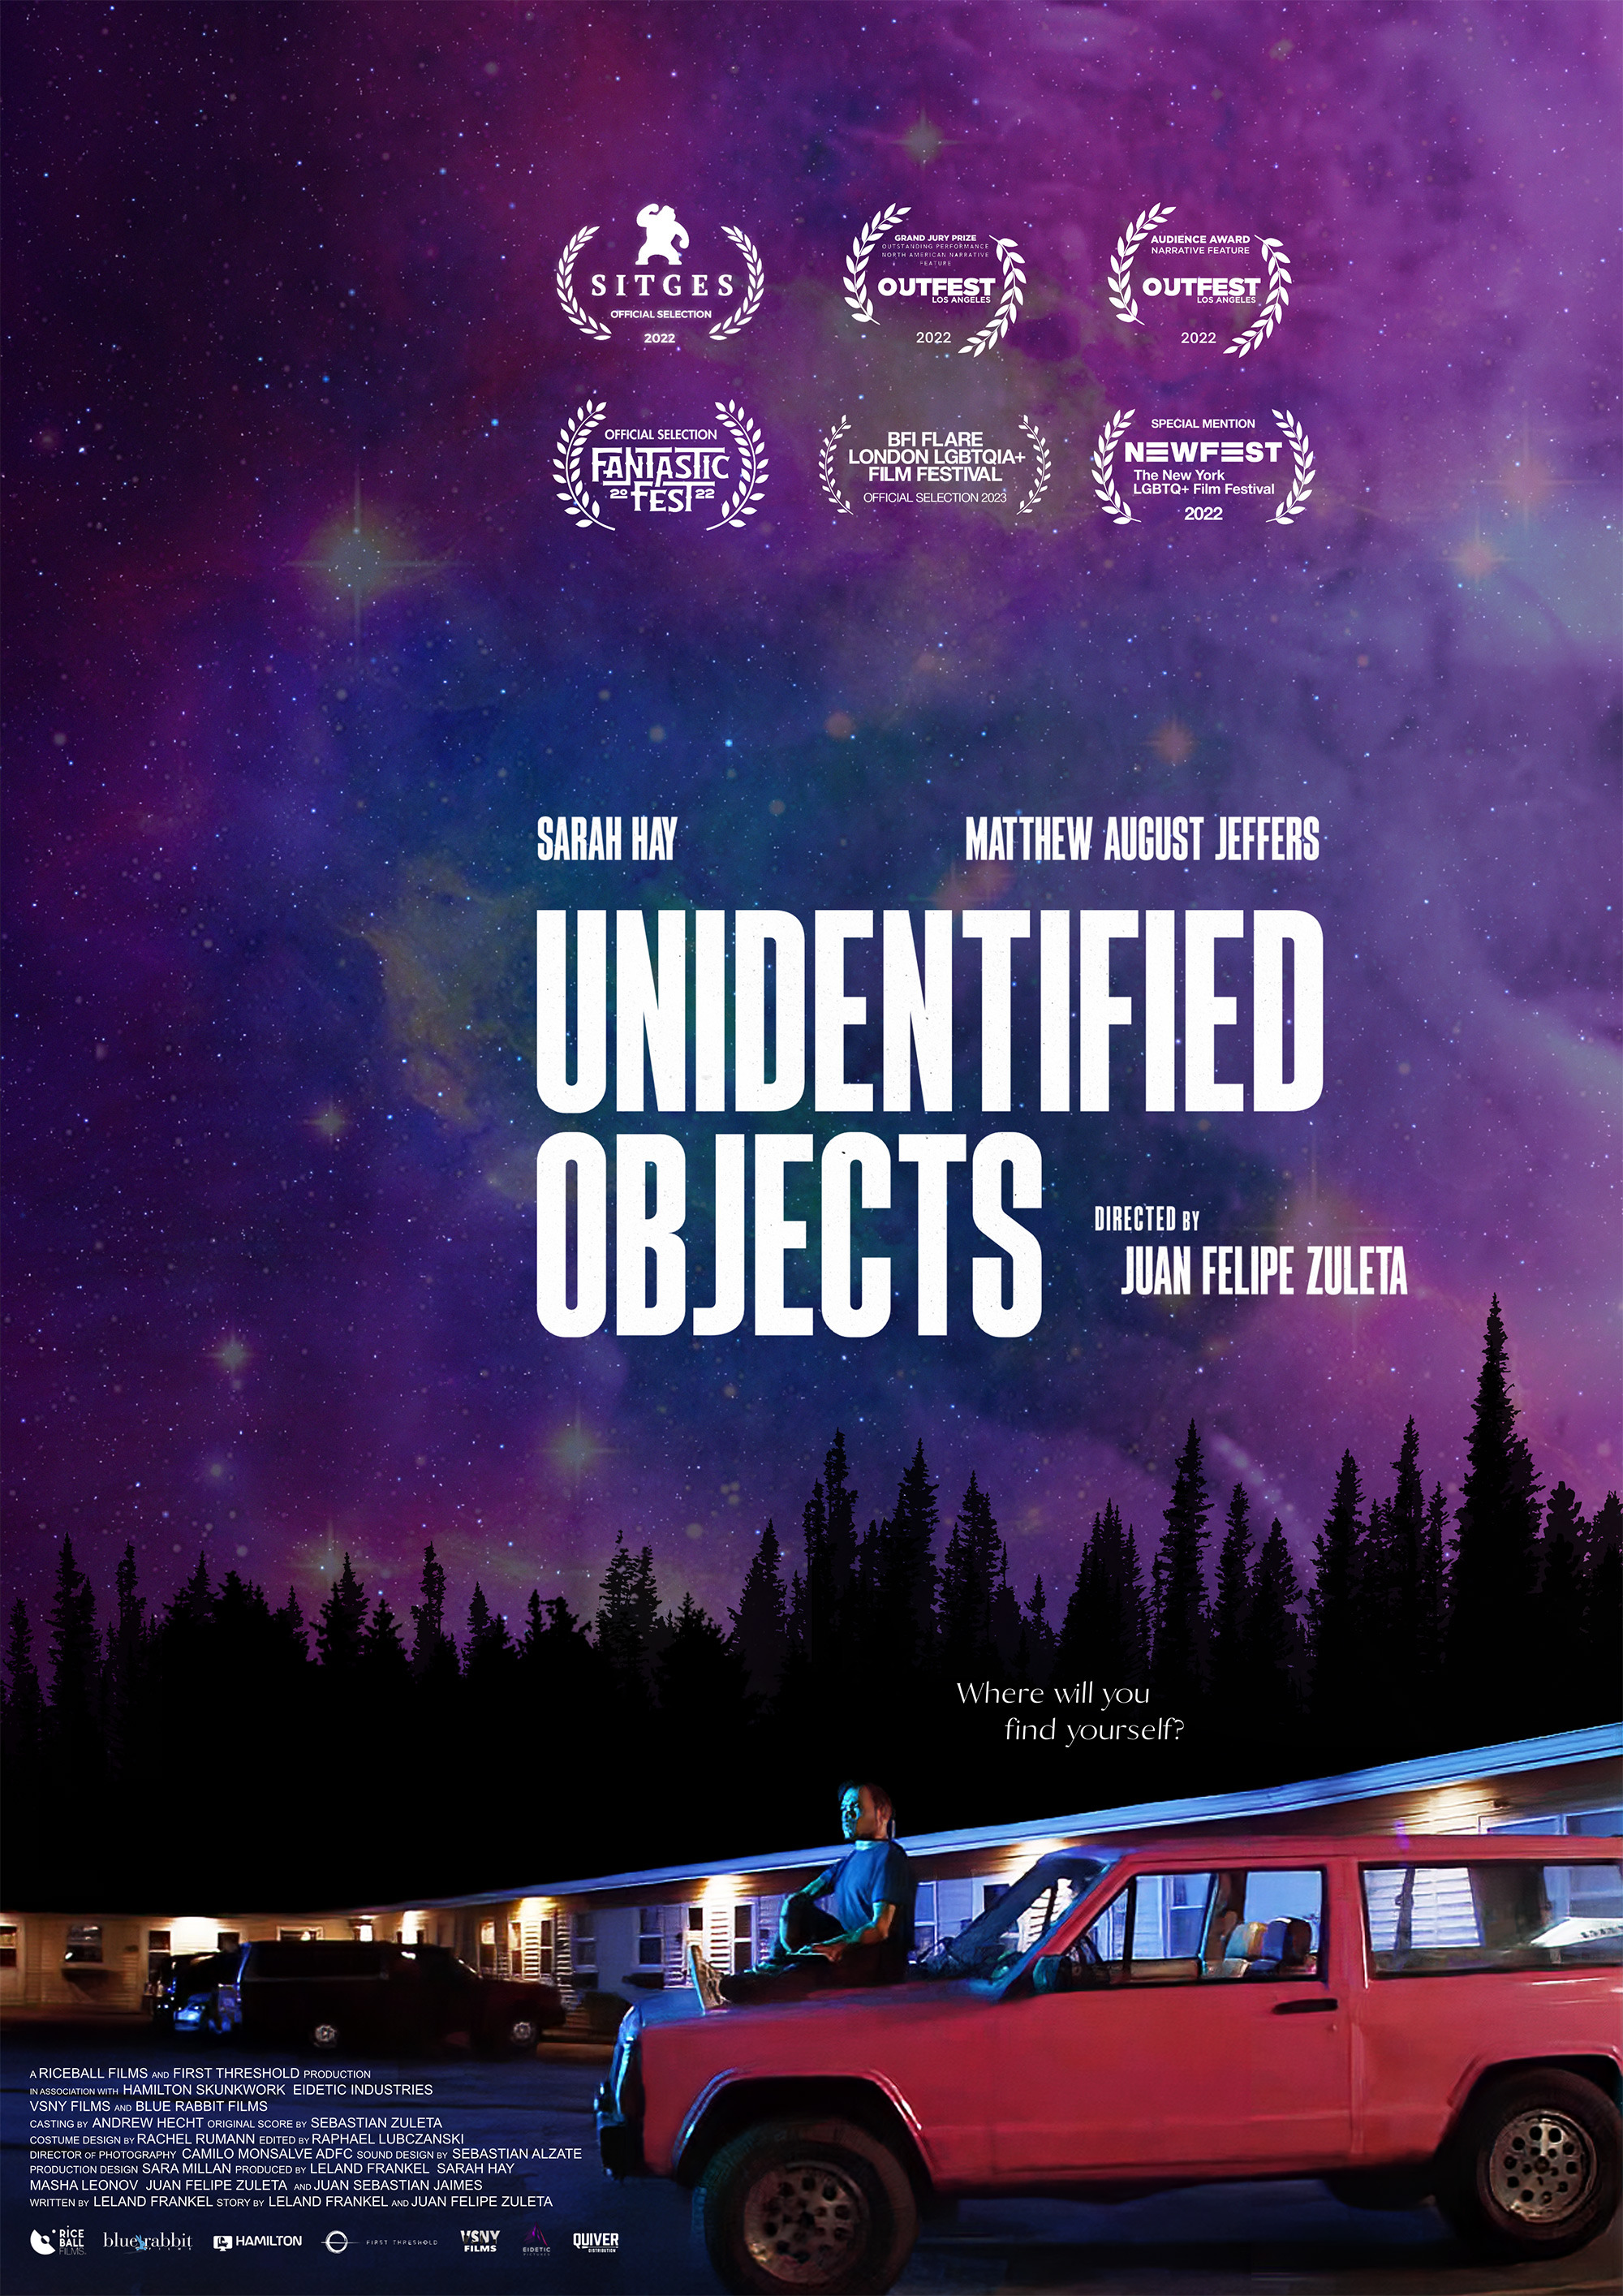 Mega Sized Movie Poster Image for Unidentified Objects 